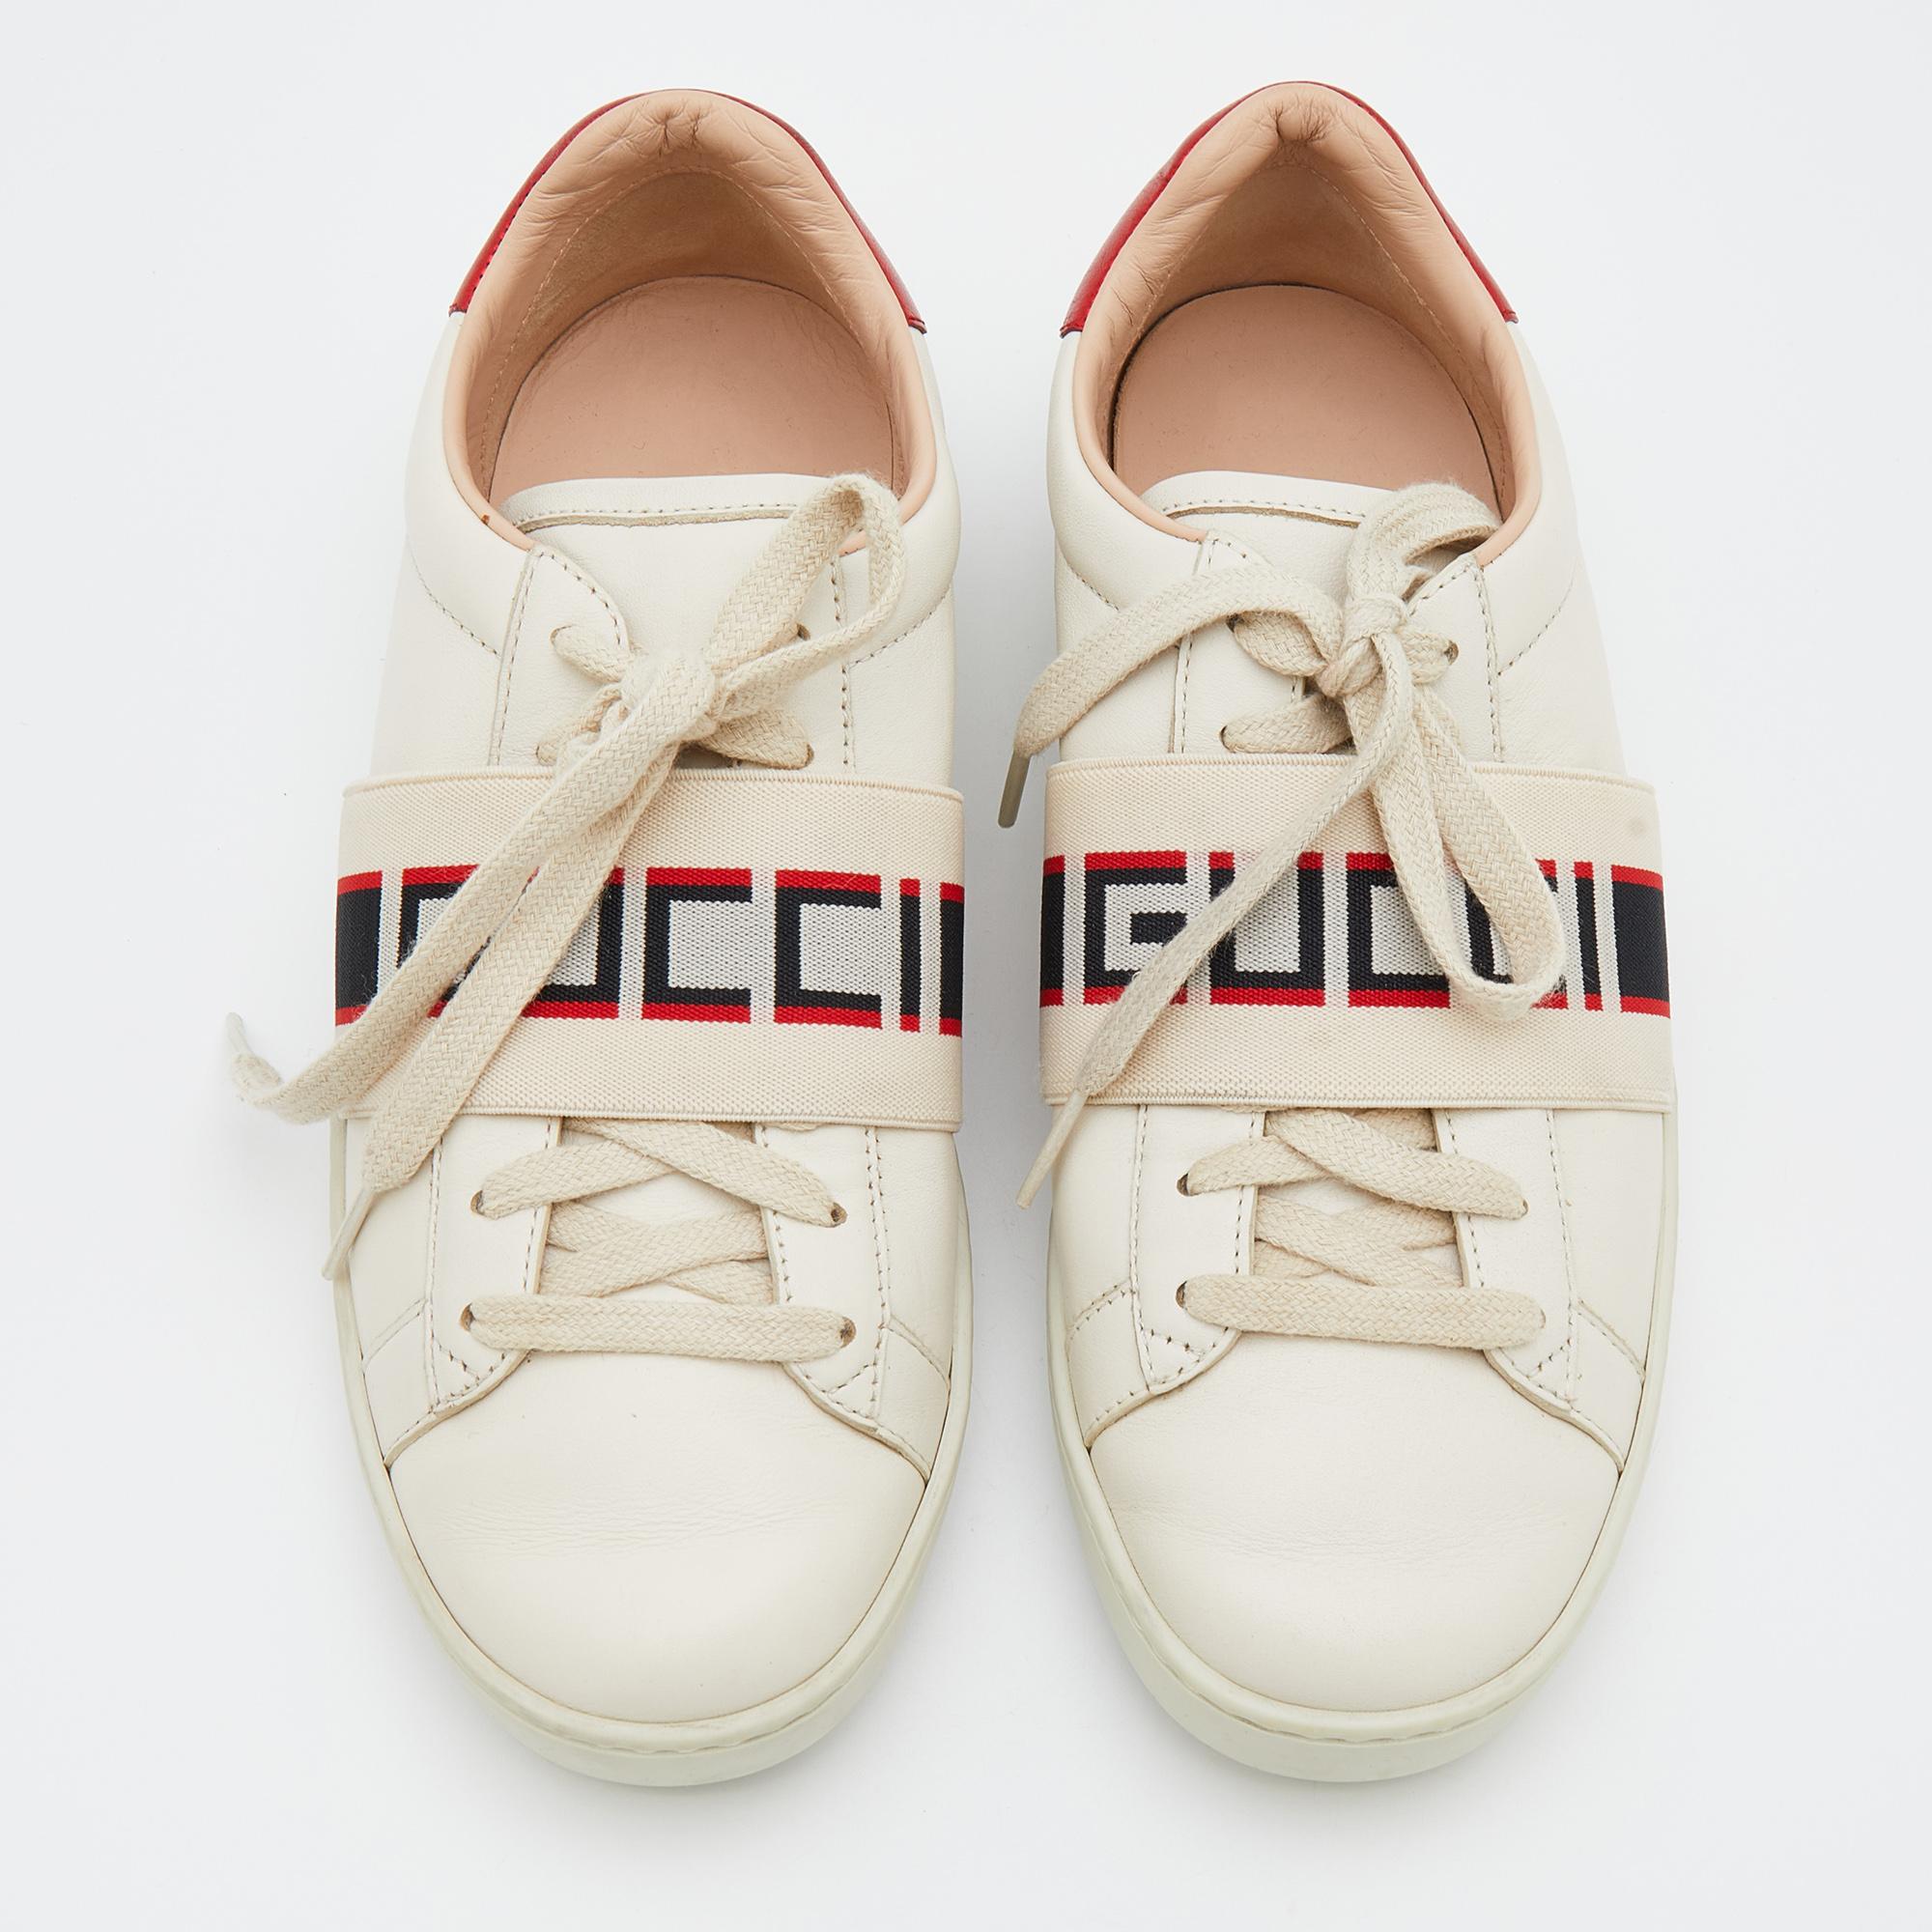 Stacked with signature details, this Gucci pair is rendered in leather and is designed in a low-cut style with lace-up vamps. The sneakers feature logo straps over the vamps, durable rubber soles for lasting wear and red panels on the counters.

